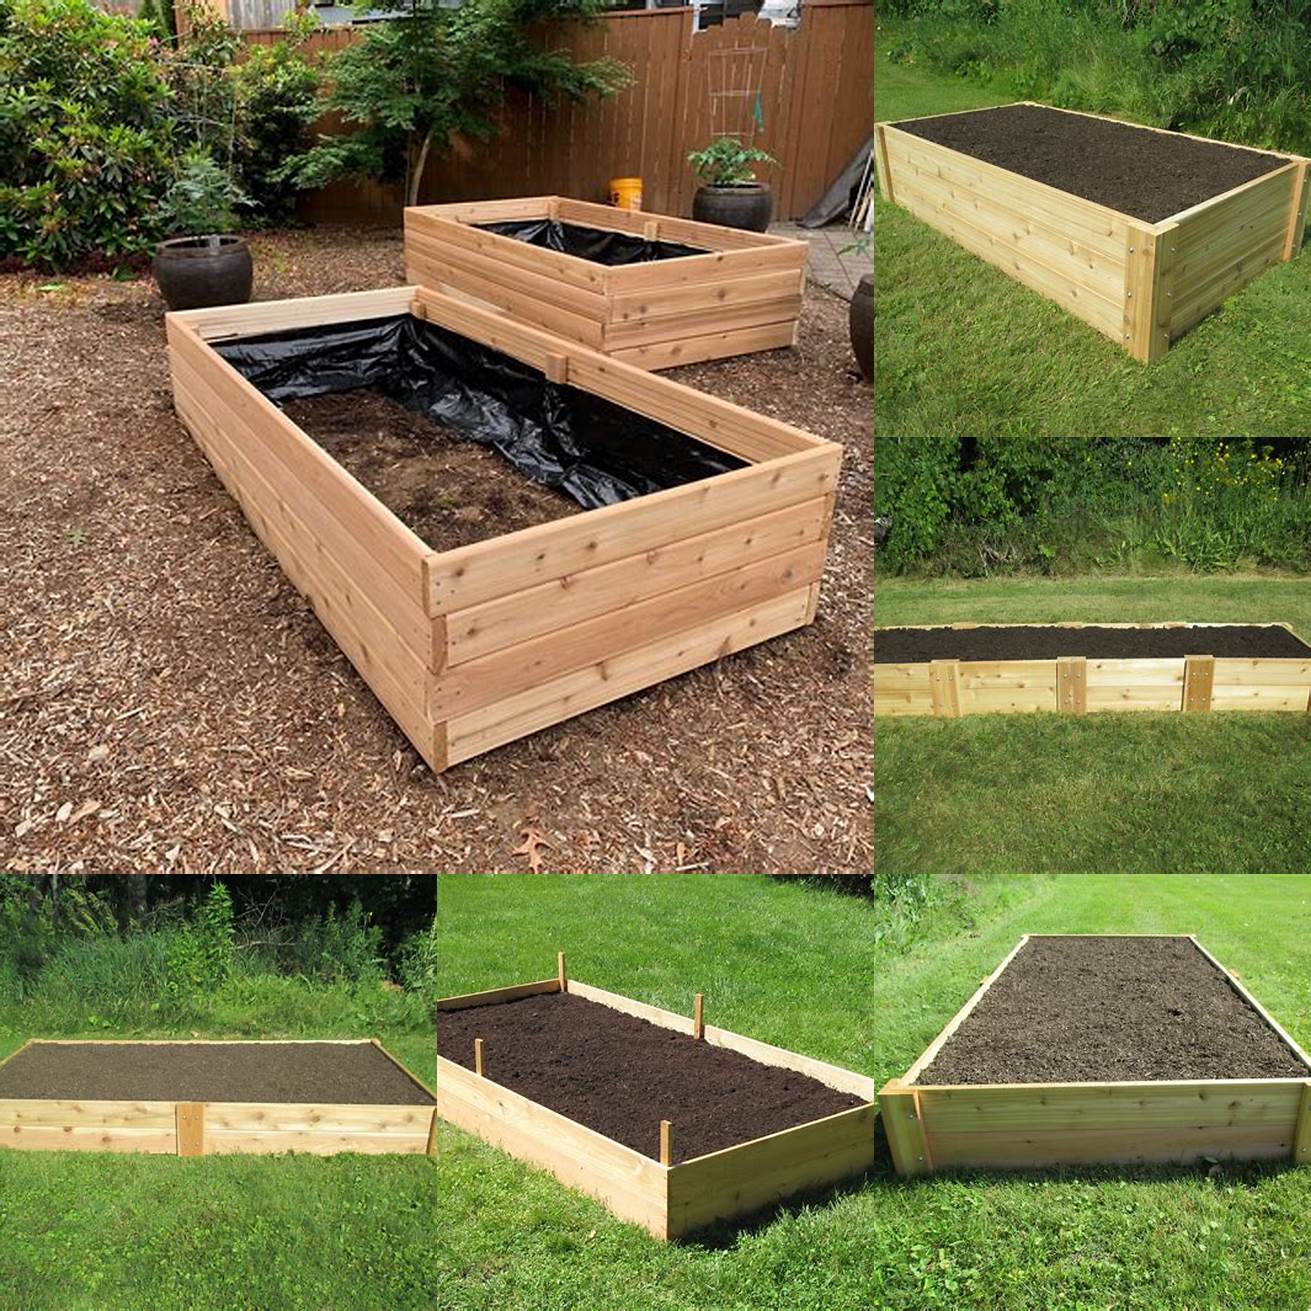 Better Soil Quality Cedar Raised Garden Beds allow you to control the soil quality more effectively